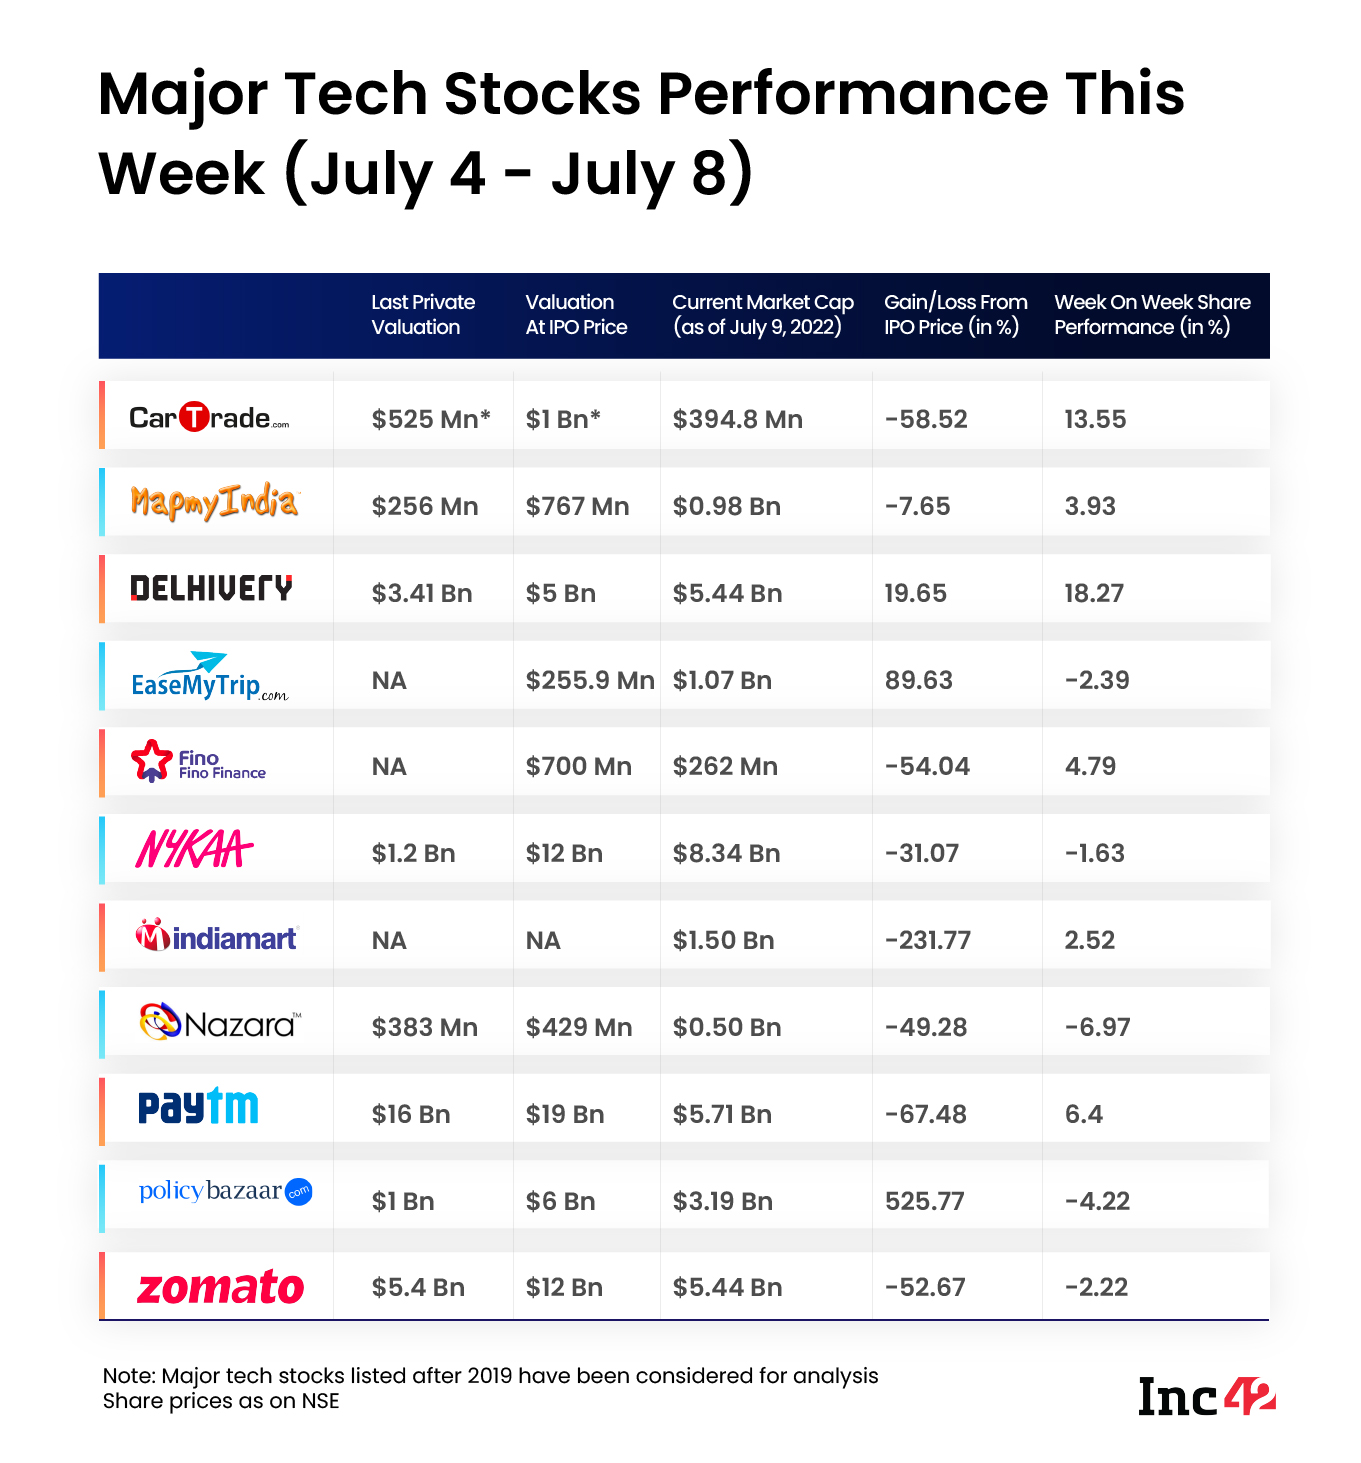 Major tech stocks performance this week (July 4 - July 8)